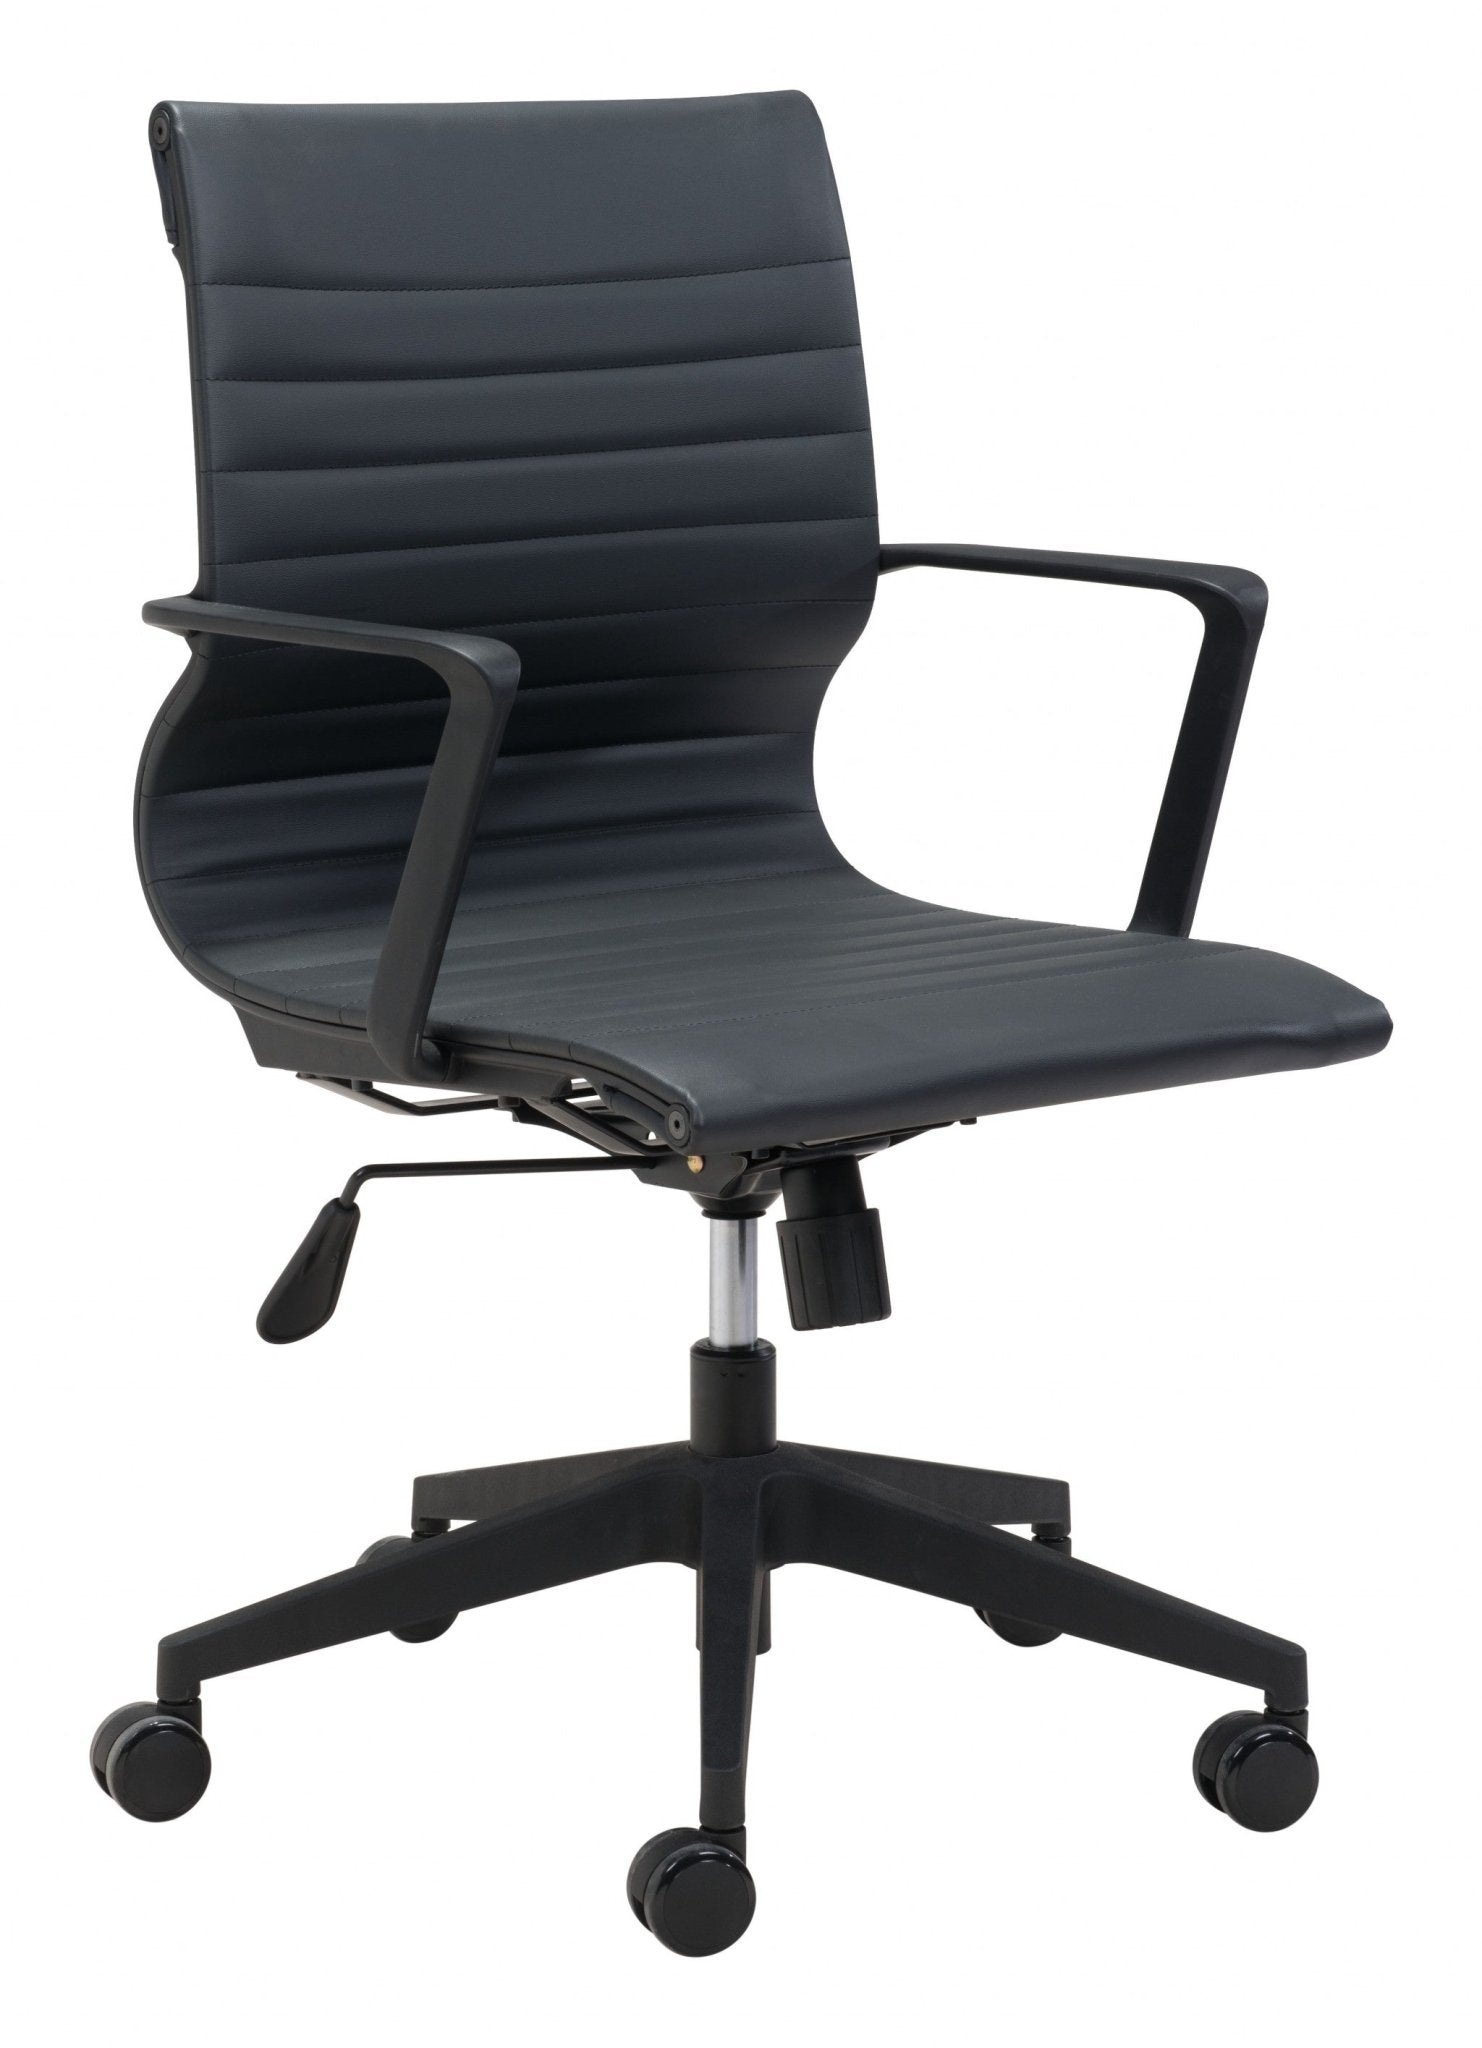 Black-Adjustable-Swivel-Metal-Rolling-Office-Chair-Office-Chairs